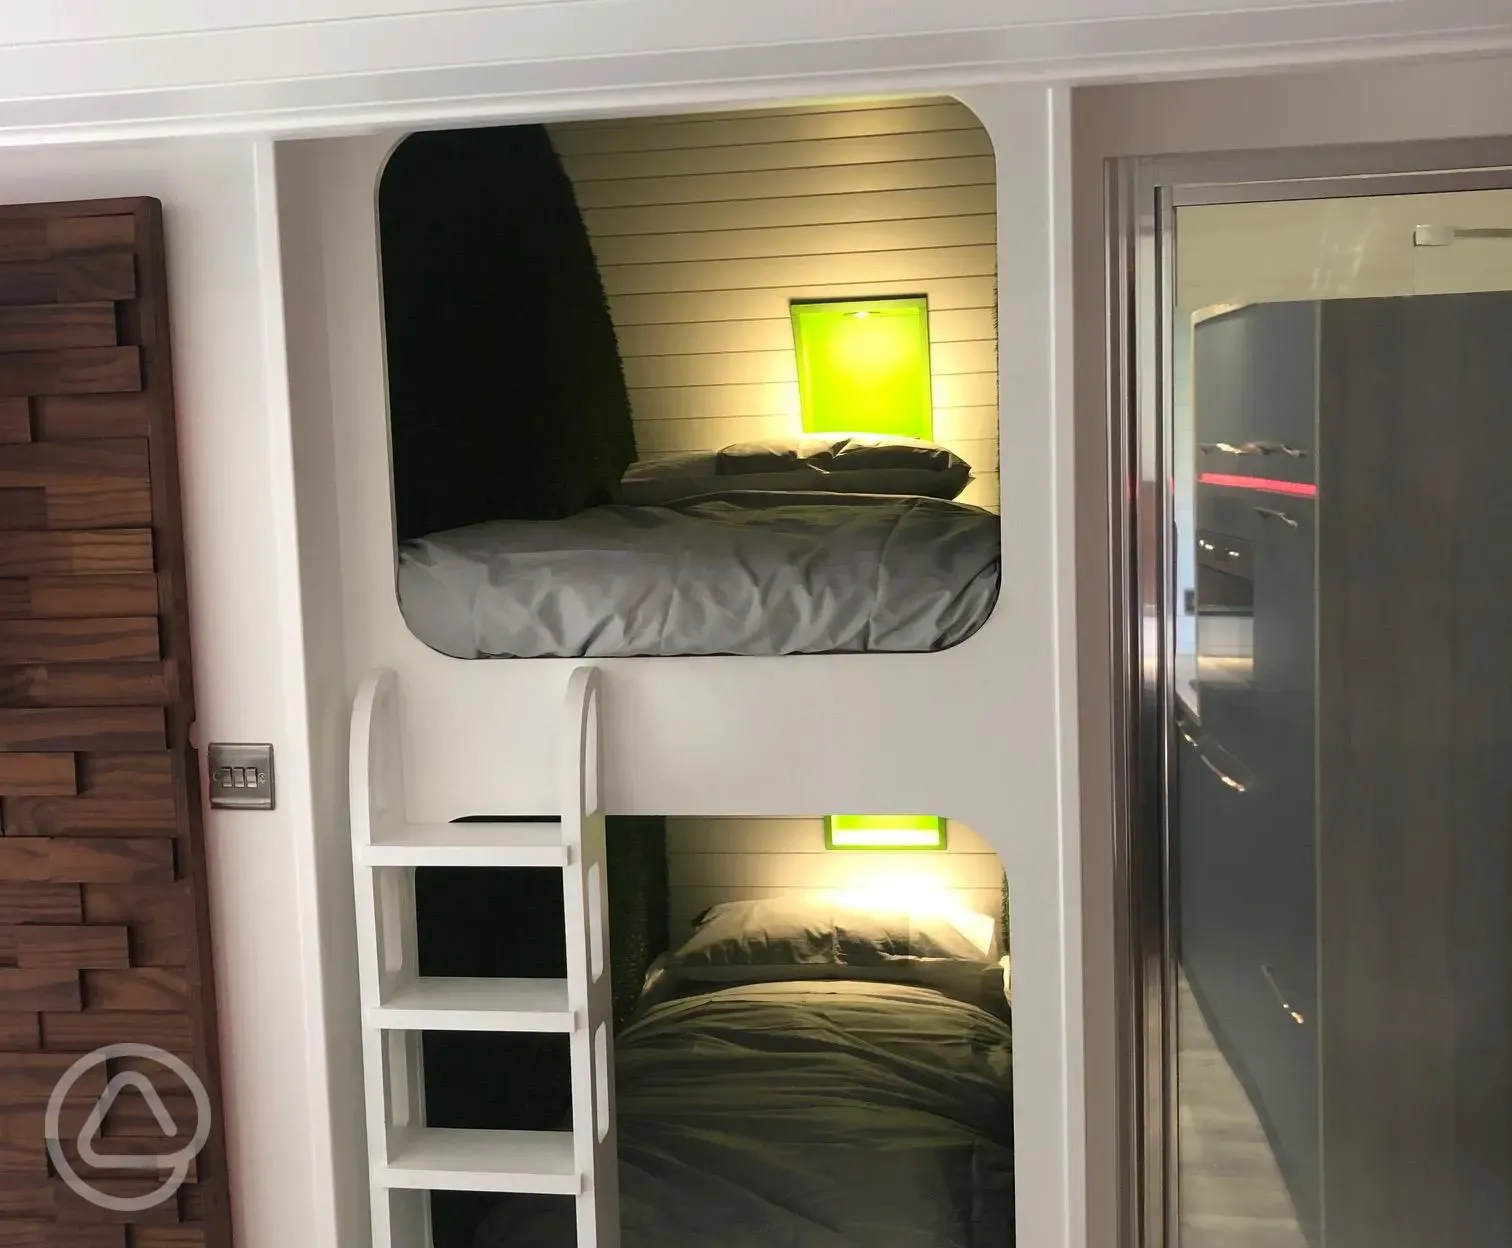 Birch Lodge's funky bunk beds